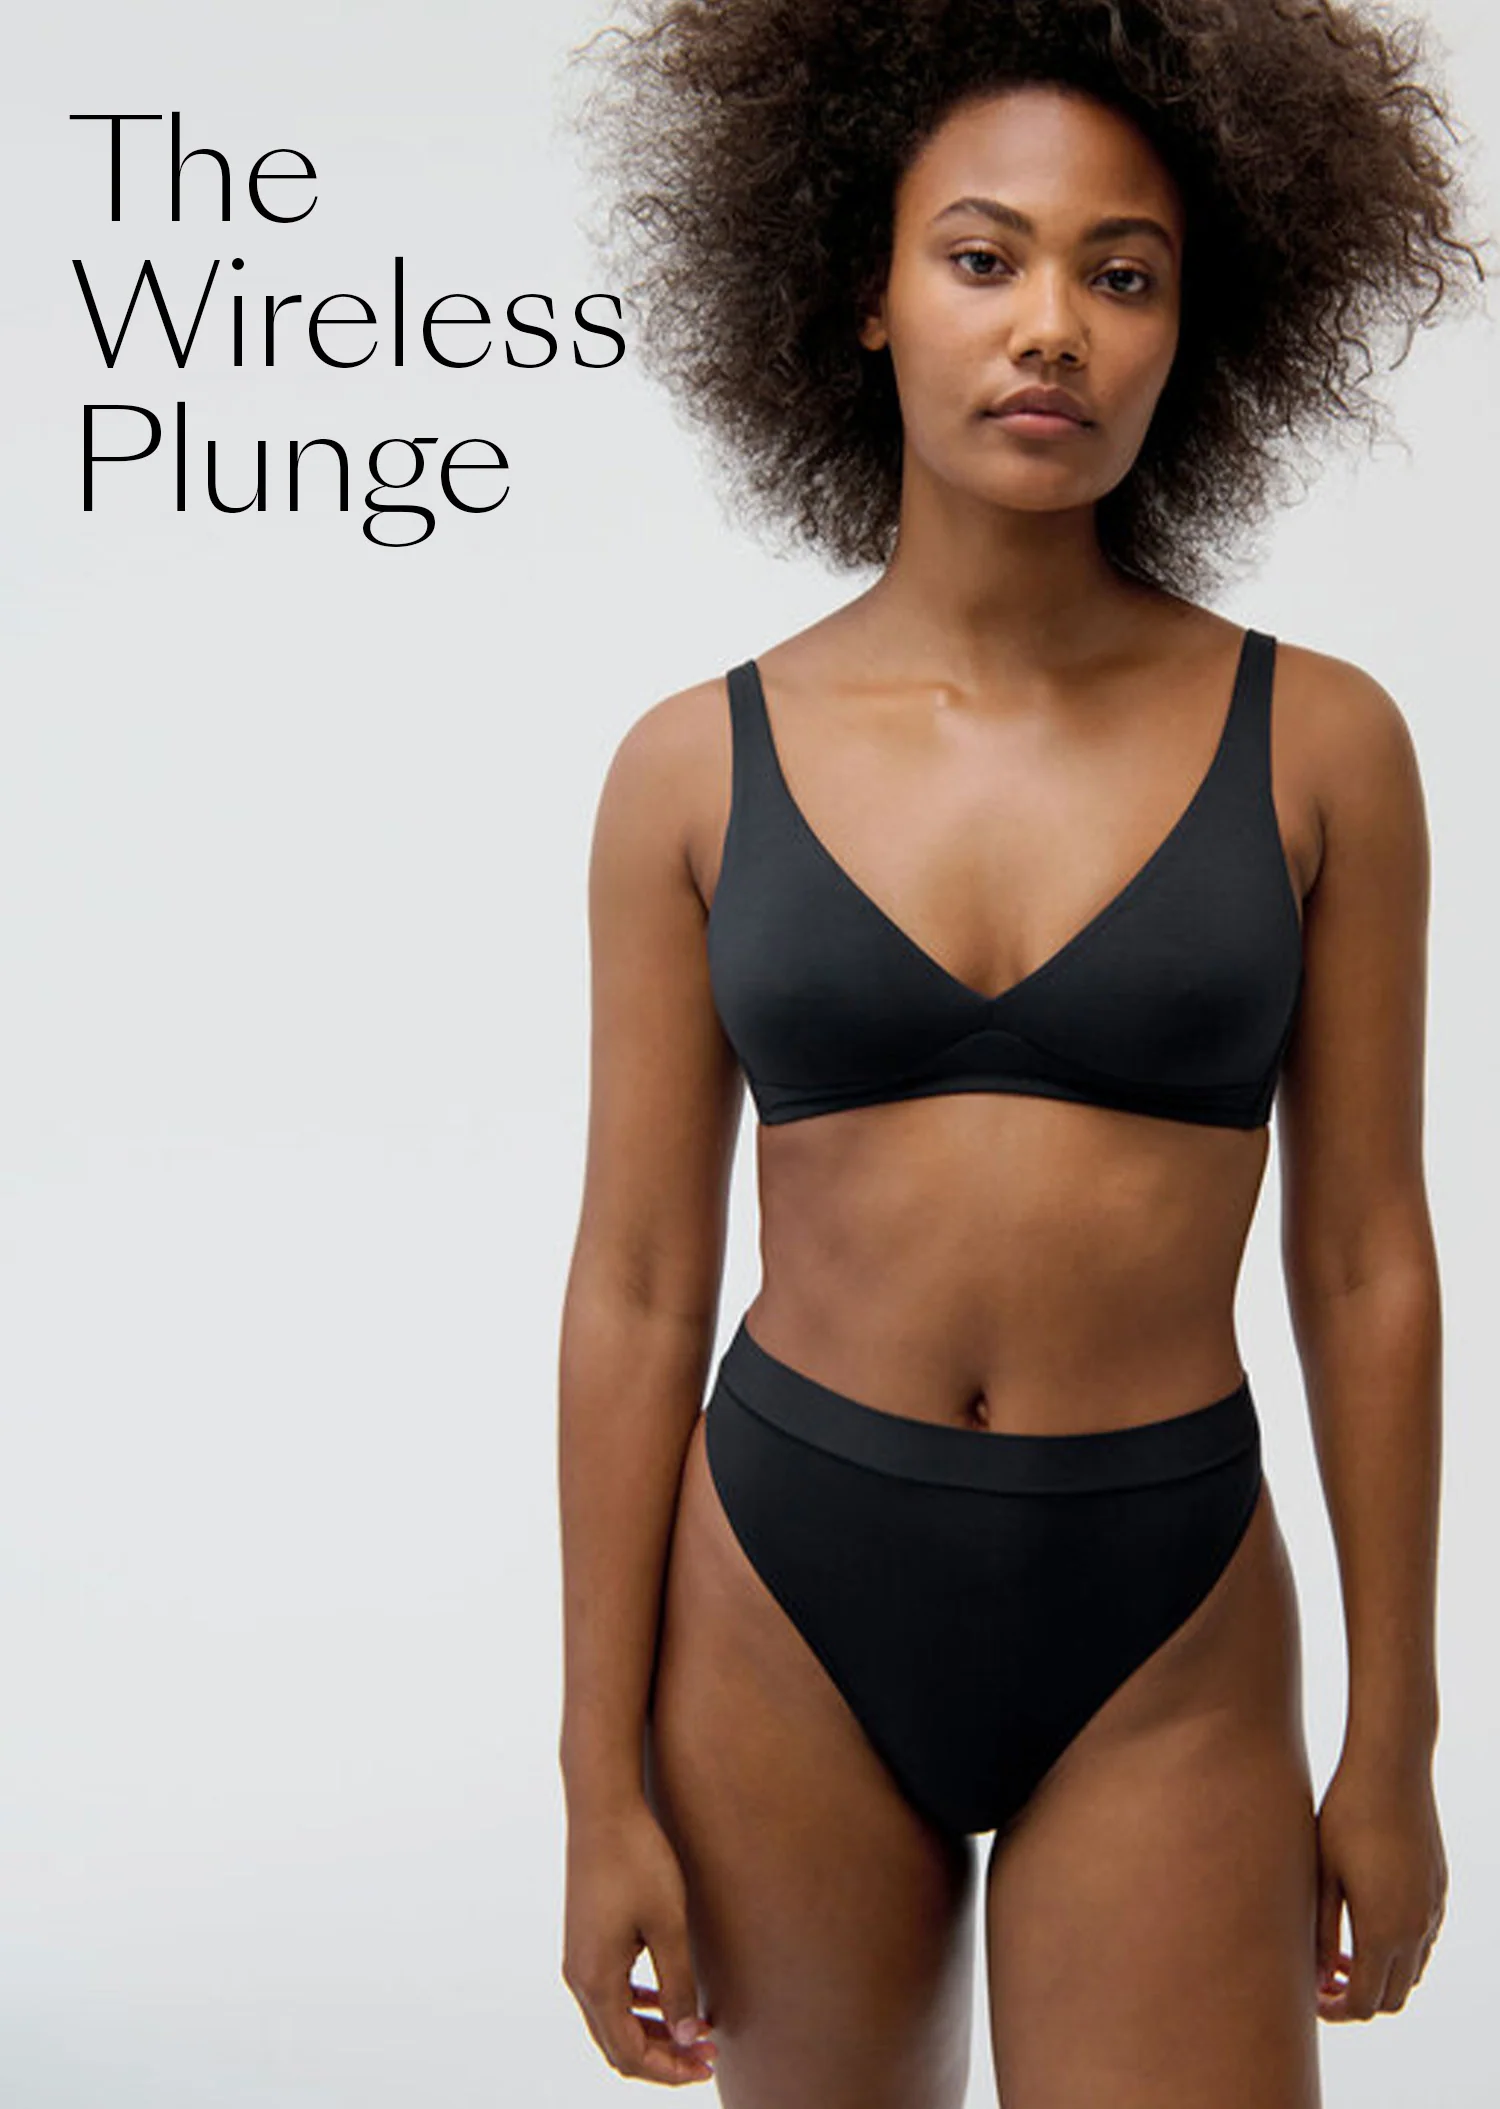 Plunge bras - Discover our collection